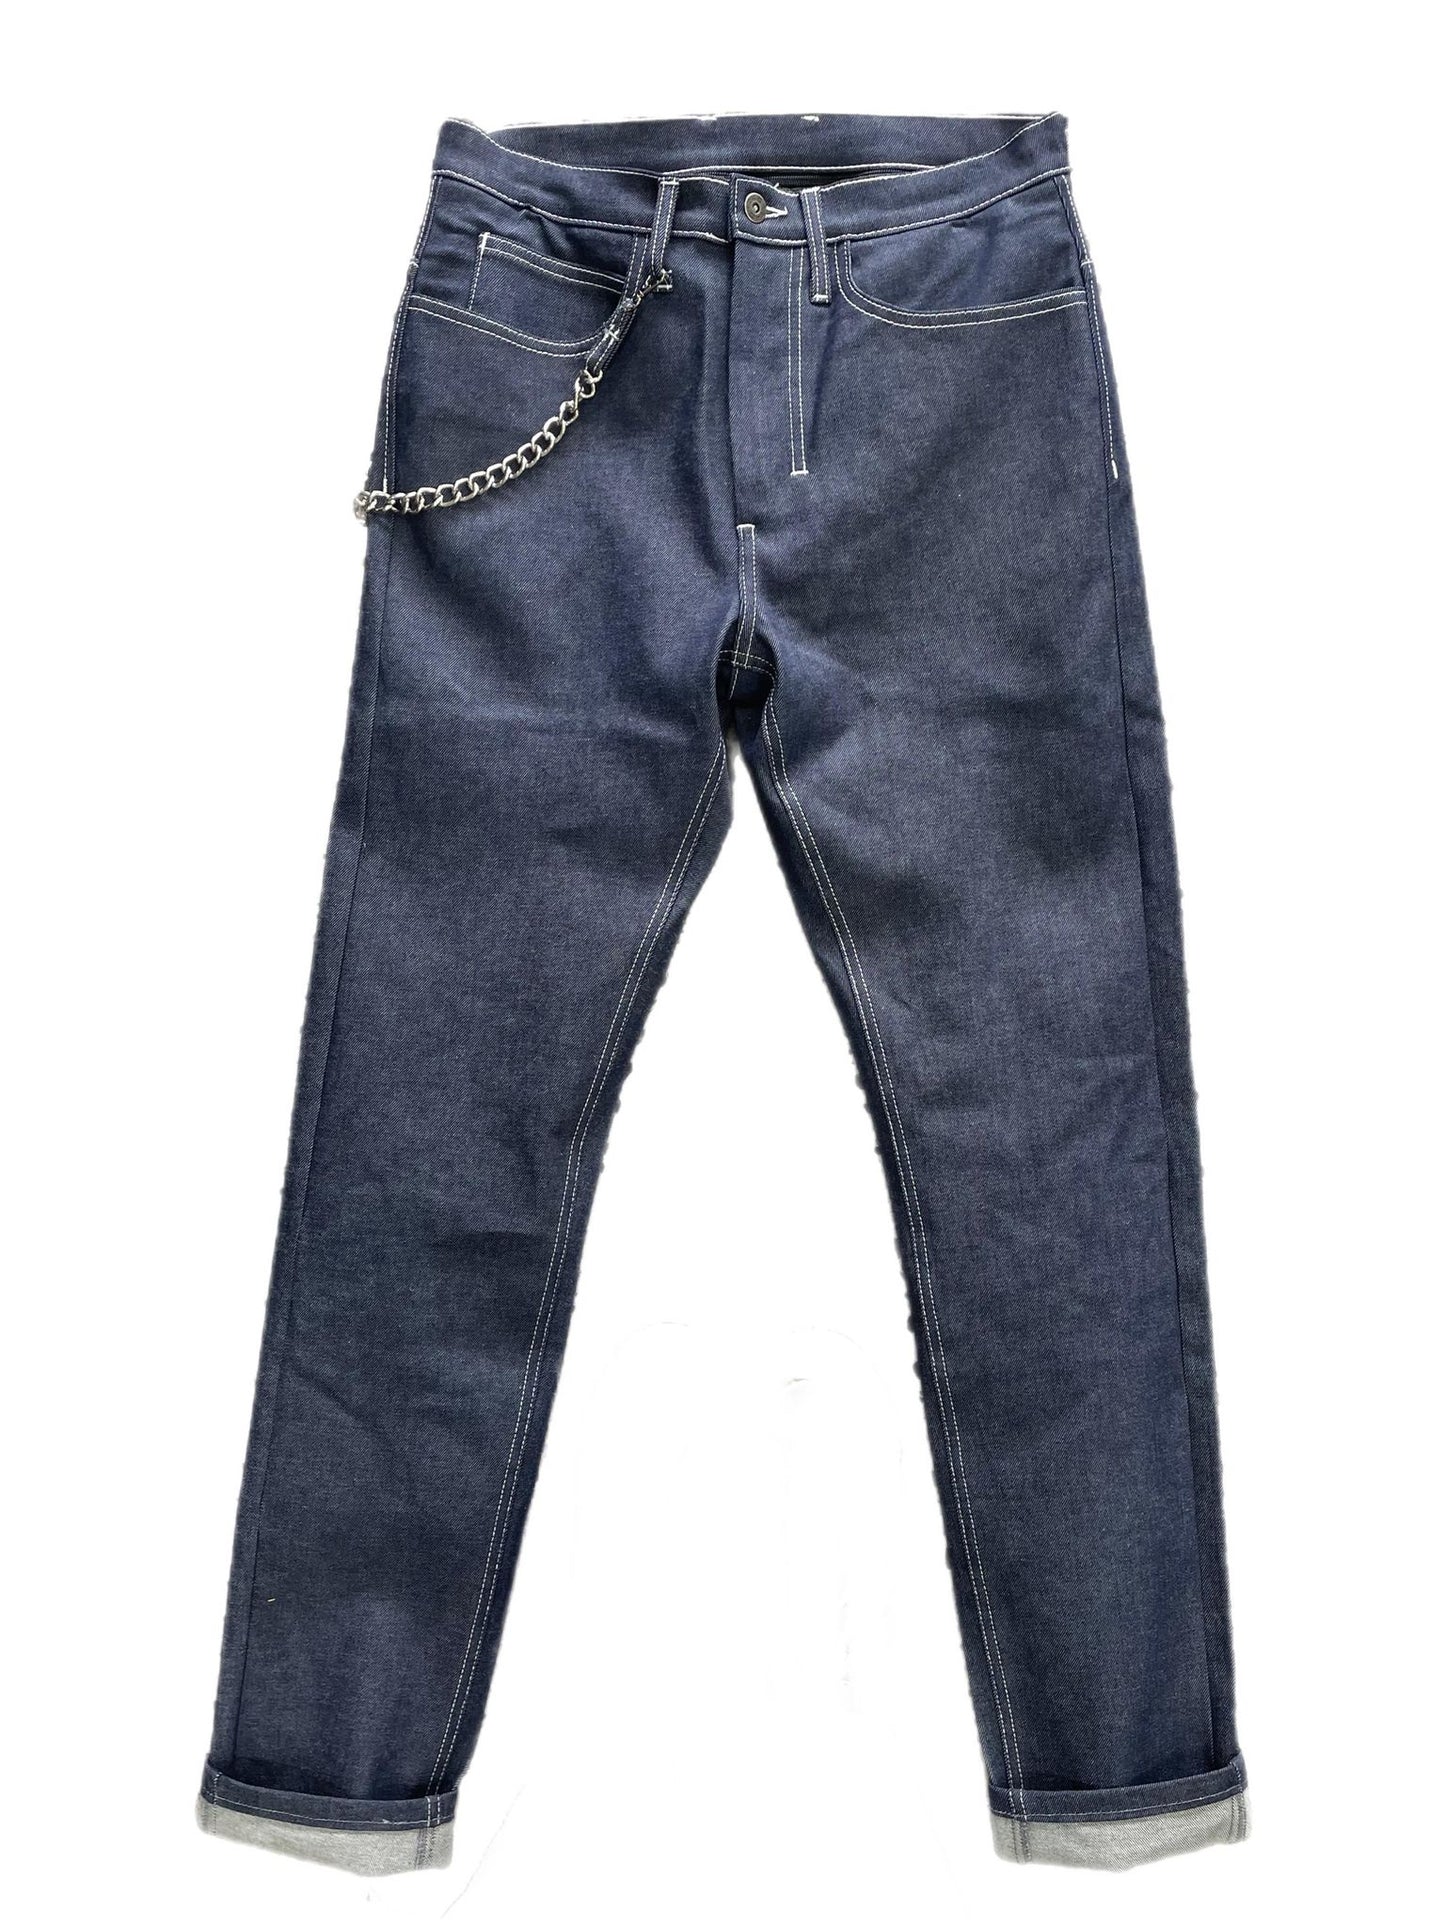 TKD Limited Edition Jordy Raw Slim Riding Jeans Combo